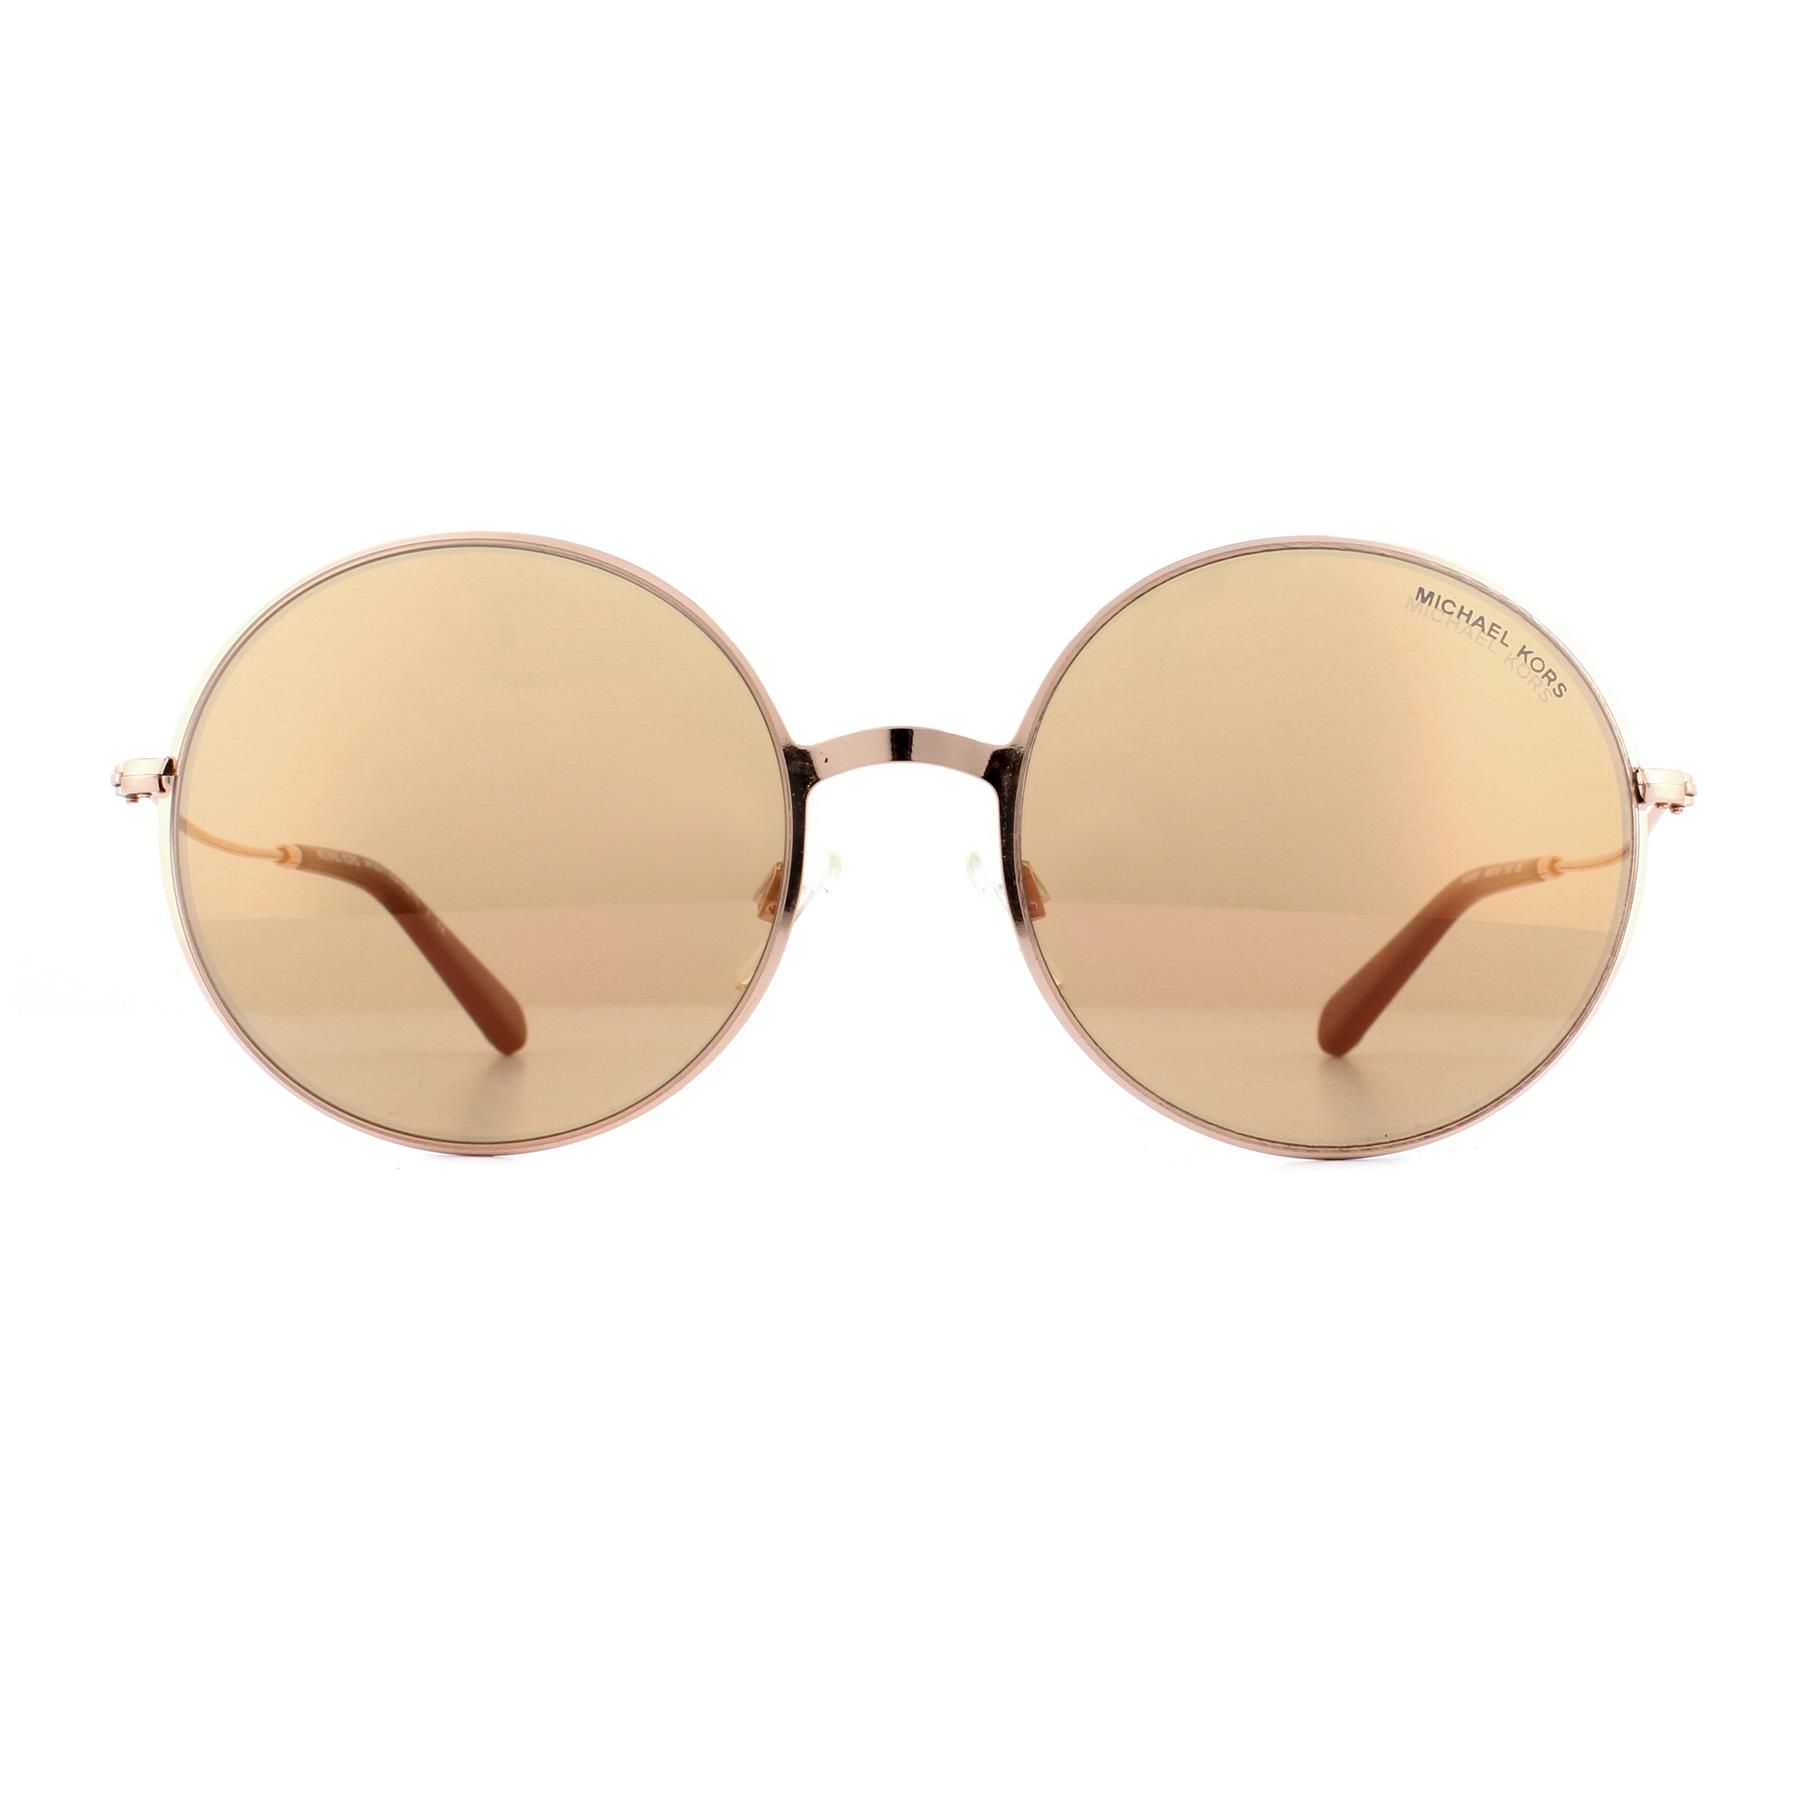 Michael Kors Sunglasses Kendall II 5017 1026R1 Rose Gold Rose Gold Flash   have a metal & plastic frame which is a Round shape and is for women